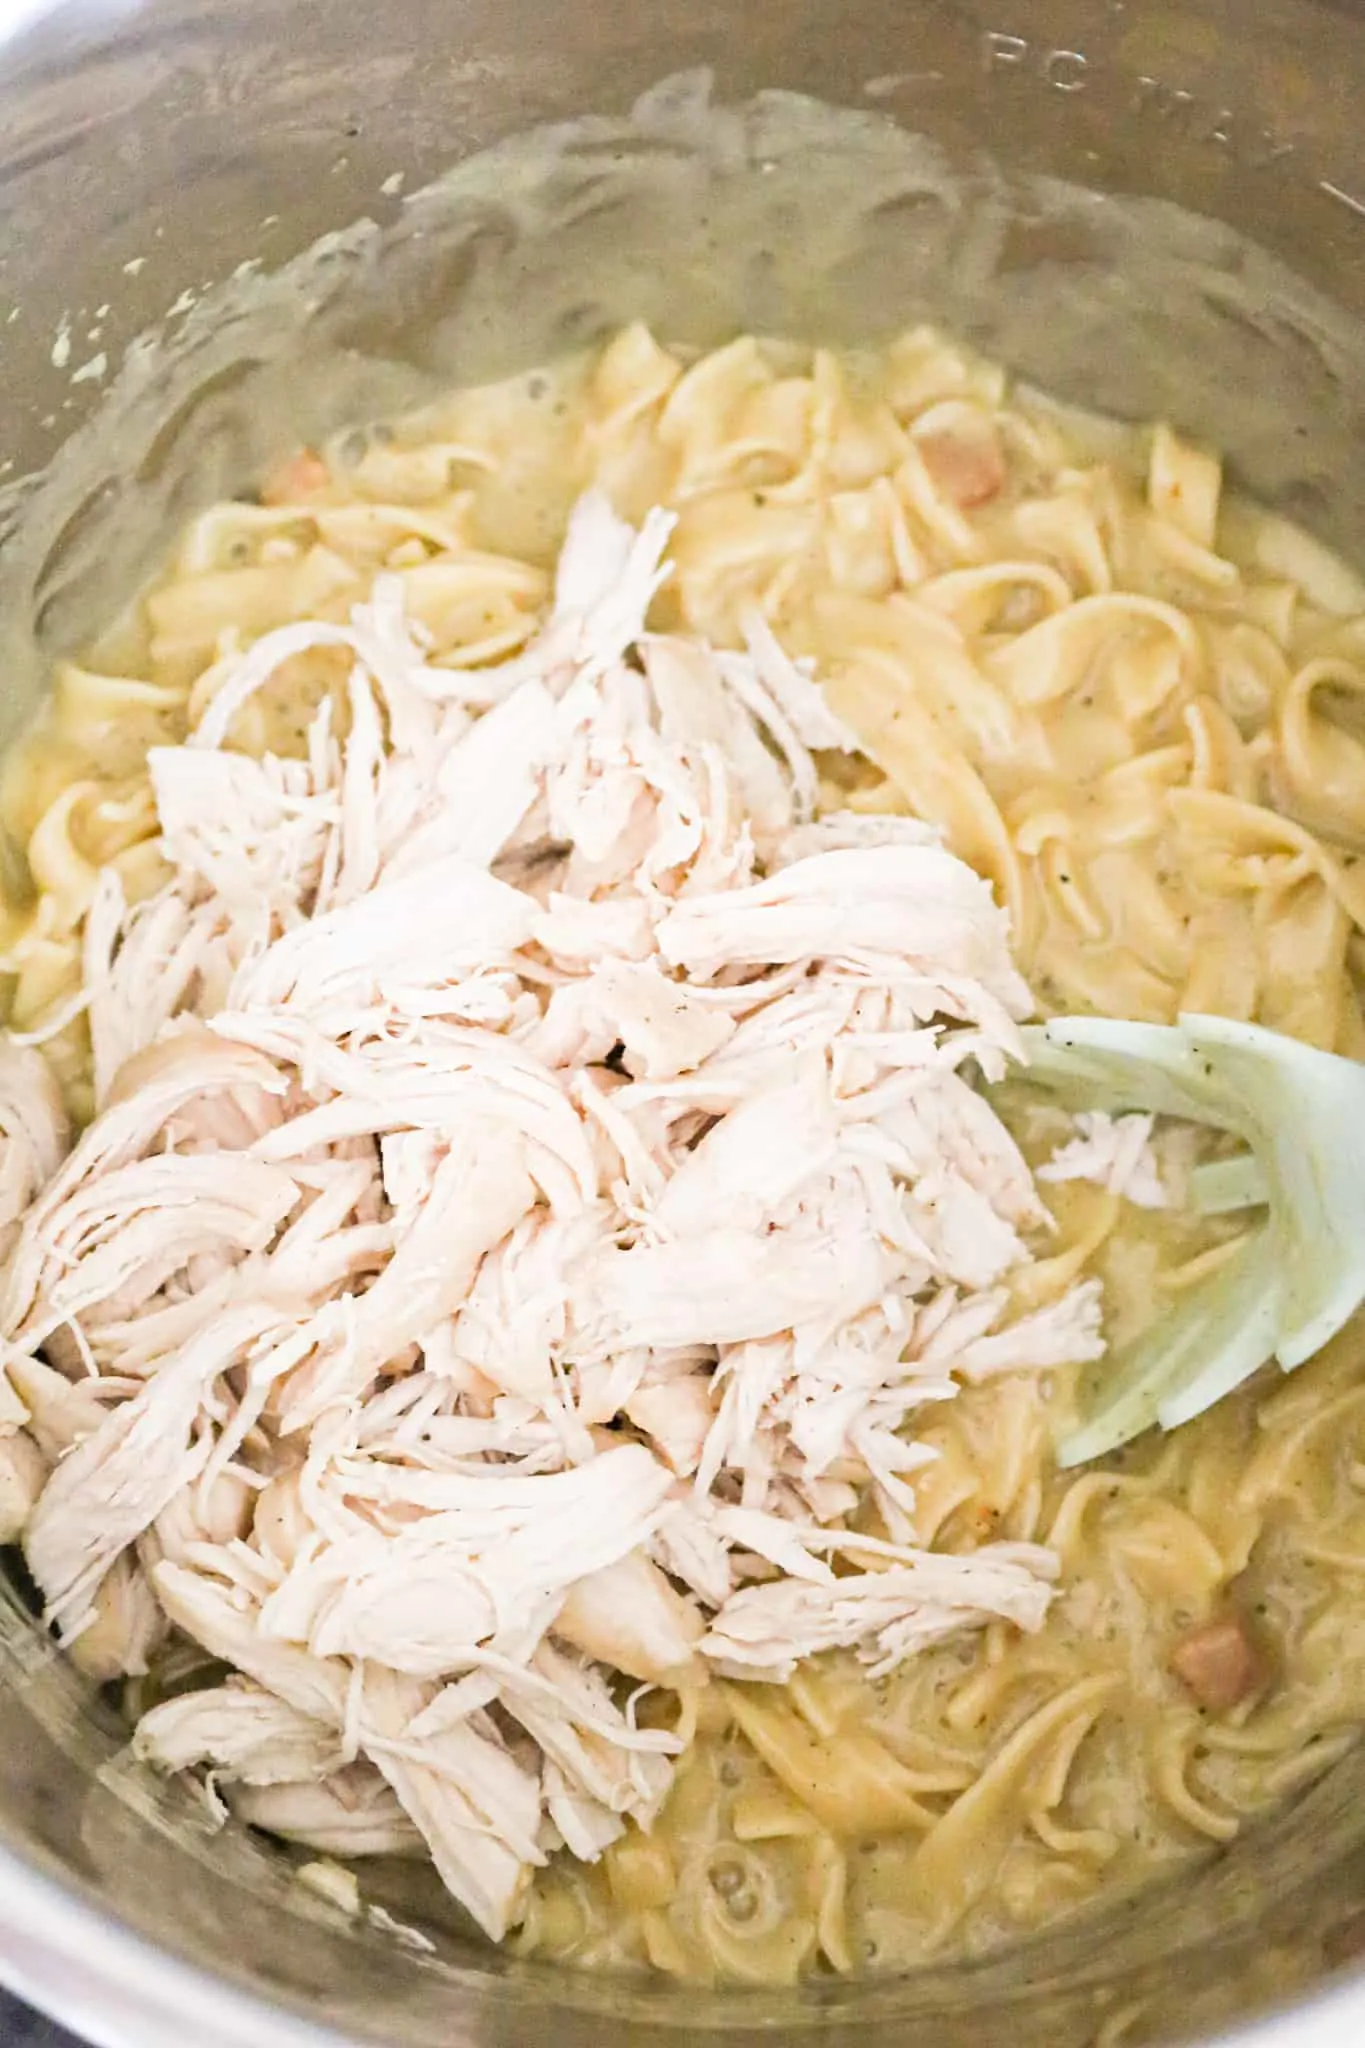 shredded chicken breast on top of creamy egg noodle mixture in an Instant Pot